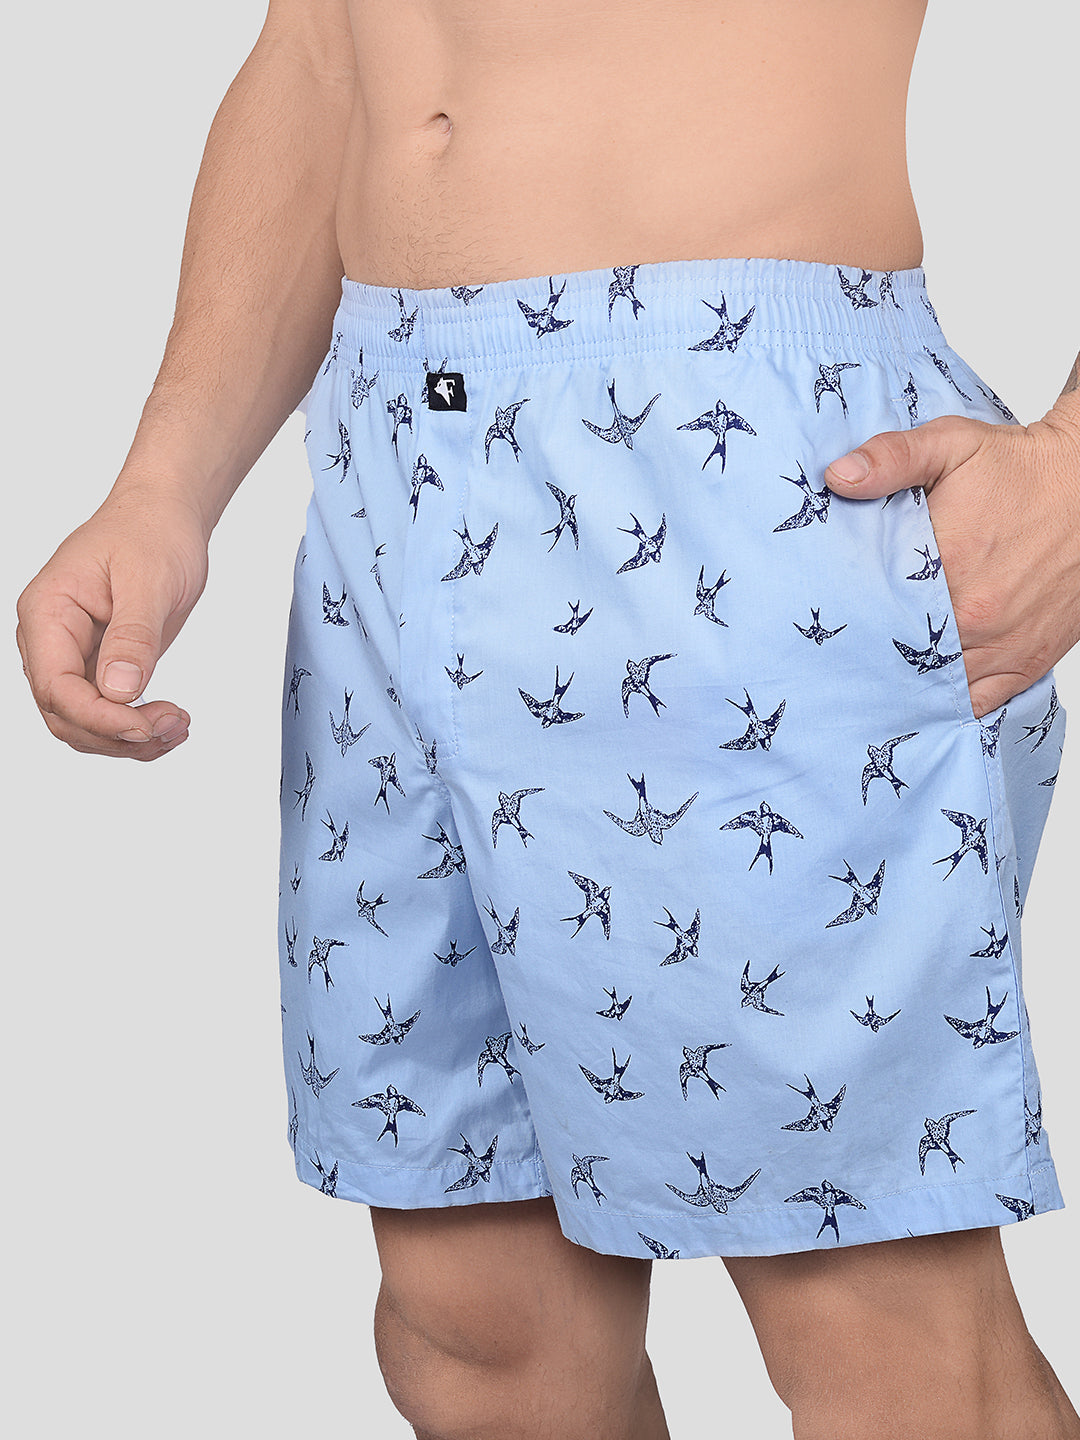 Frenchie Men's Boxer Printed Shorts LB (Assorted)